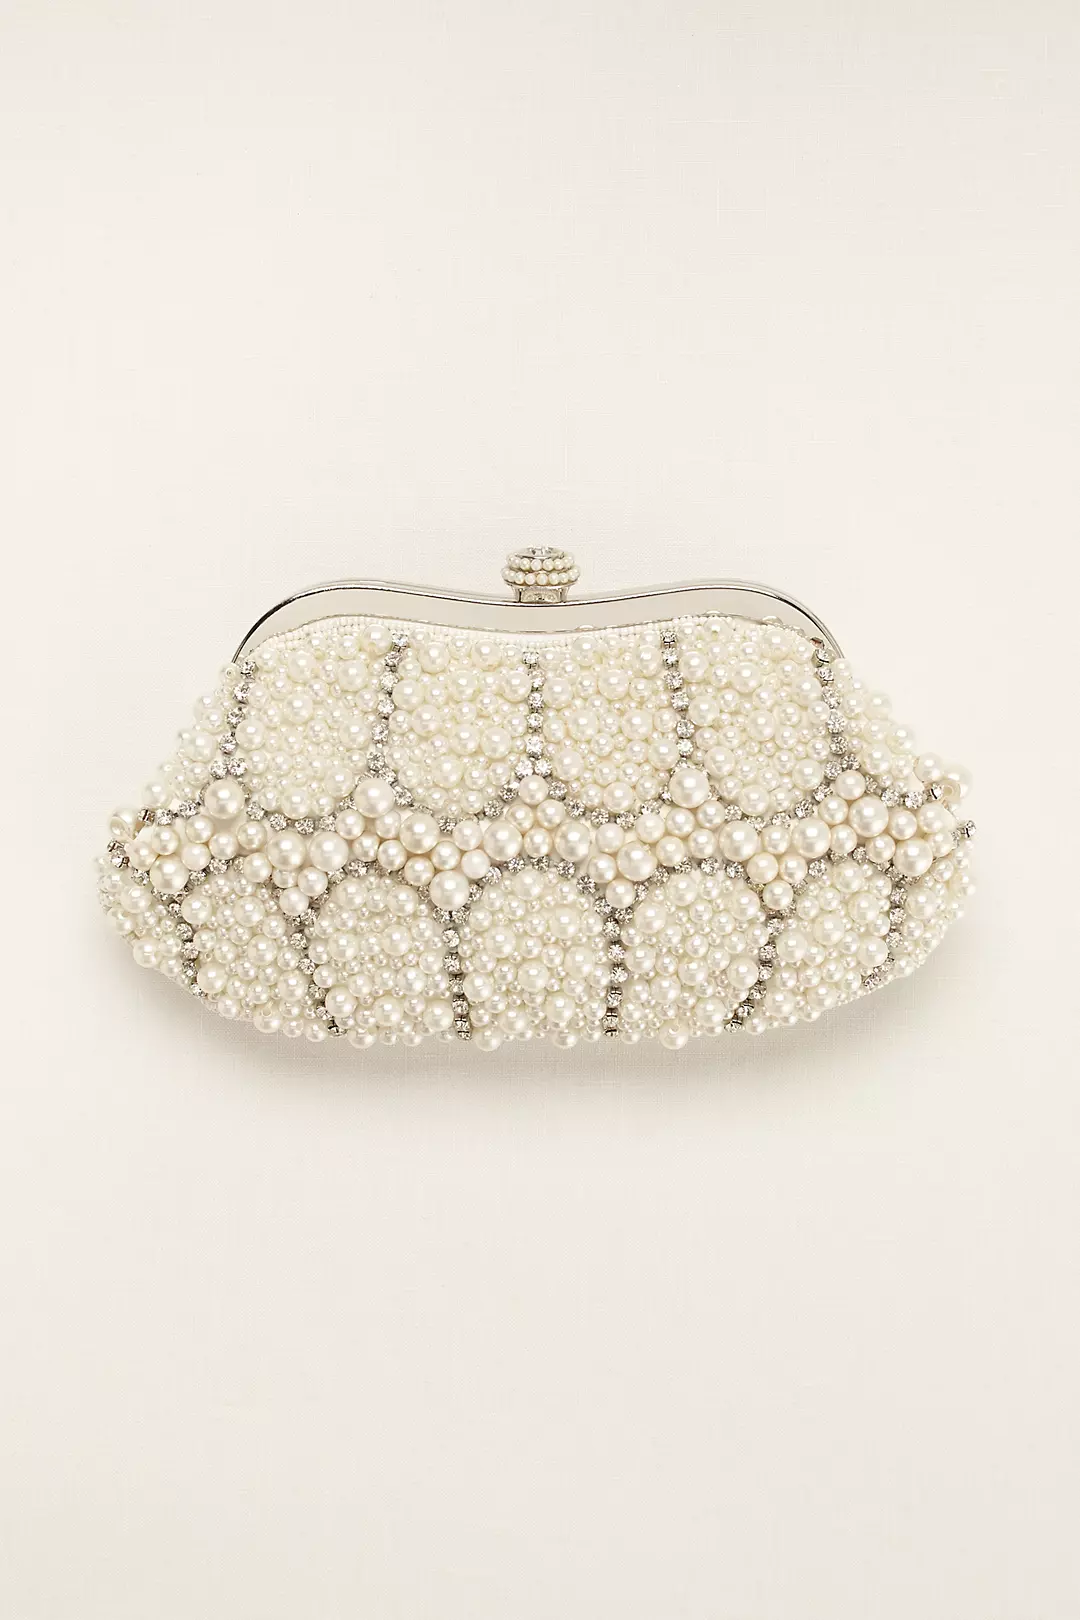 Expressions NYC Mixed Pearl and Crystal Clutch Image